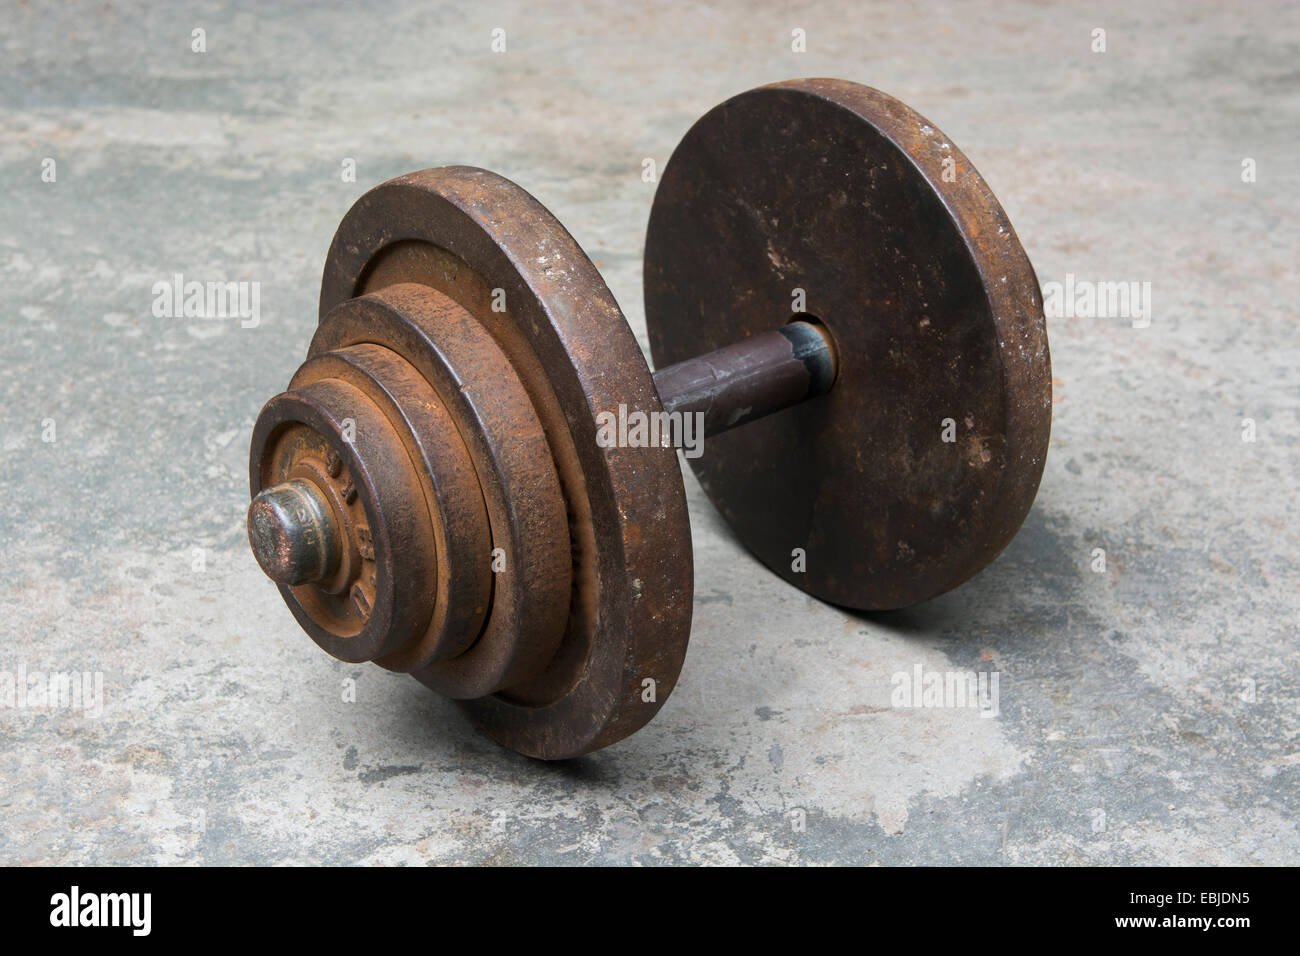 Dumbbells at fitness park Stock Photo